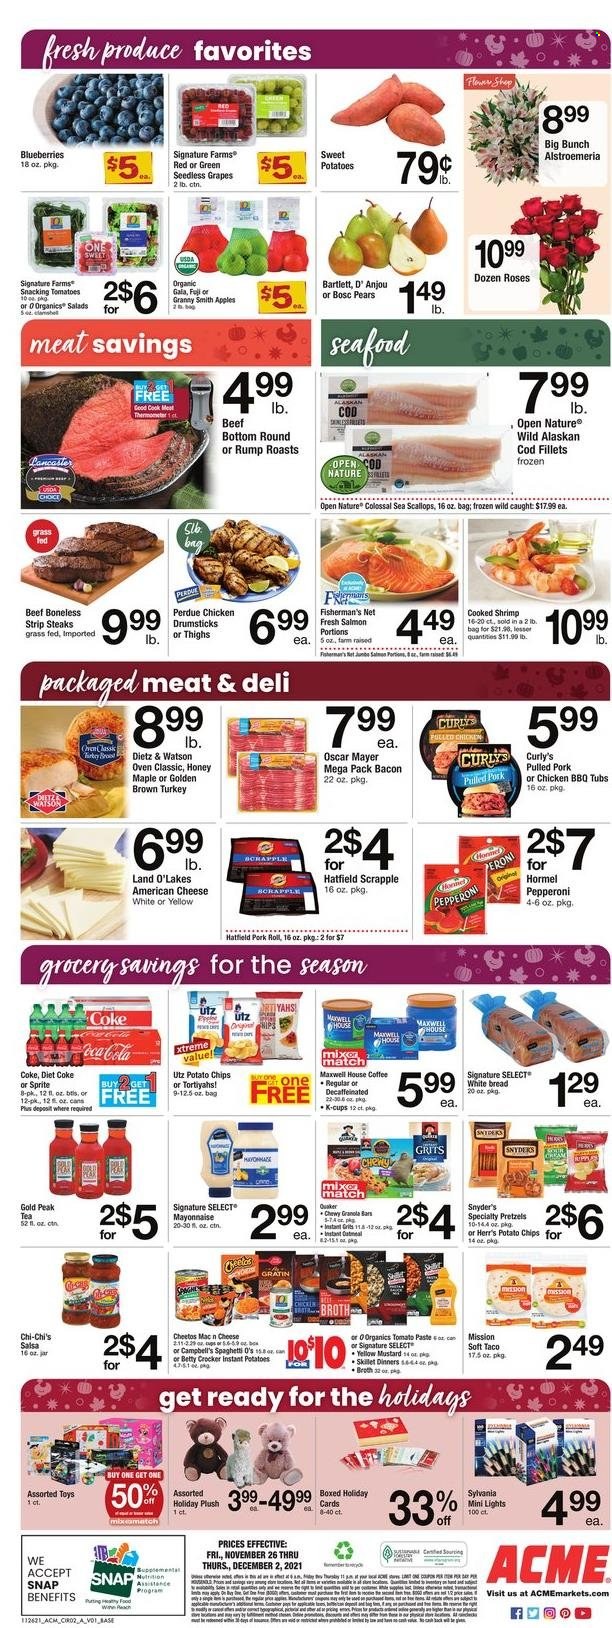 thumbnail - ACME Flyer - 11/26/2021 - 12/02/2021 - Sales products - seedless grapes, bread, white bread, pretzels, sweet potato, apples, blueberries, Gala, grapes, pears, Granny Smith, cod, salmon, scallops, shrimps, Campbell's, spaghetti, Quaker, Perdue®, pulled pork, pulled chicken, Hormel, bacon, Oscar Mayer, Dietz & Watson, pepperoni, american cheese, cheese, mayonnaise, potato chips, Cheetos, oatmeal, grits, broth, tomato paste, granola, mustard, salsa, honey, Coca-Cola, Sprite, Diet Coke, Gold Peak Tea, Maxwell House, tea, coffee, coffee capsules, K-Cups, Peroni, chicken drumsticks, beef meat, steak, striploin steak, pork meat, thermometer, fork, meat thermometer, Sylvania, toys. Page 2.